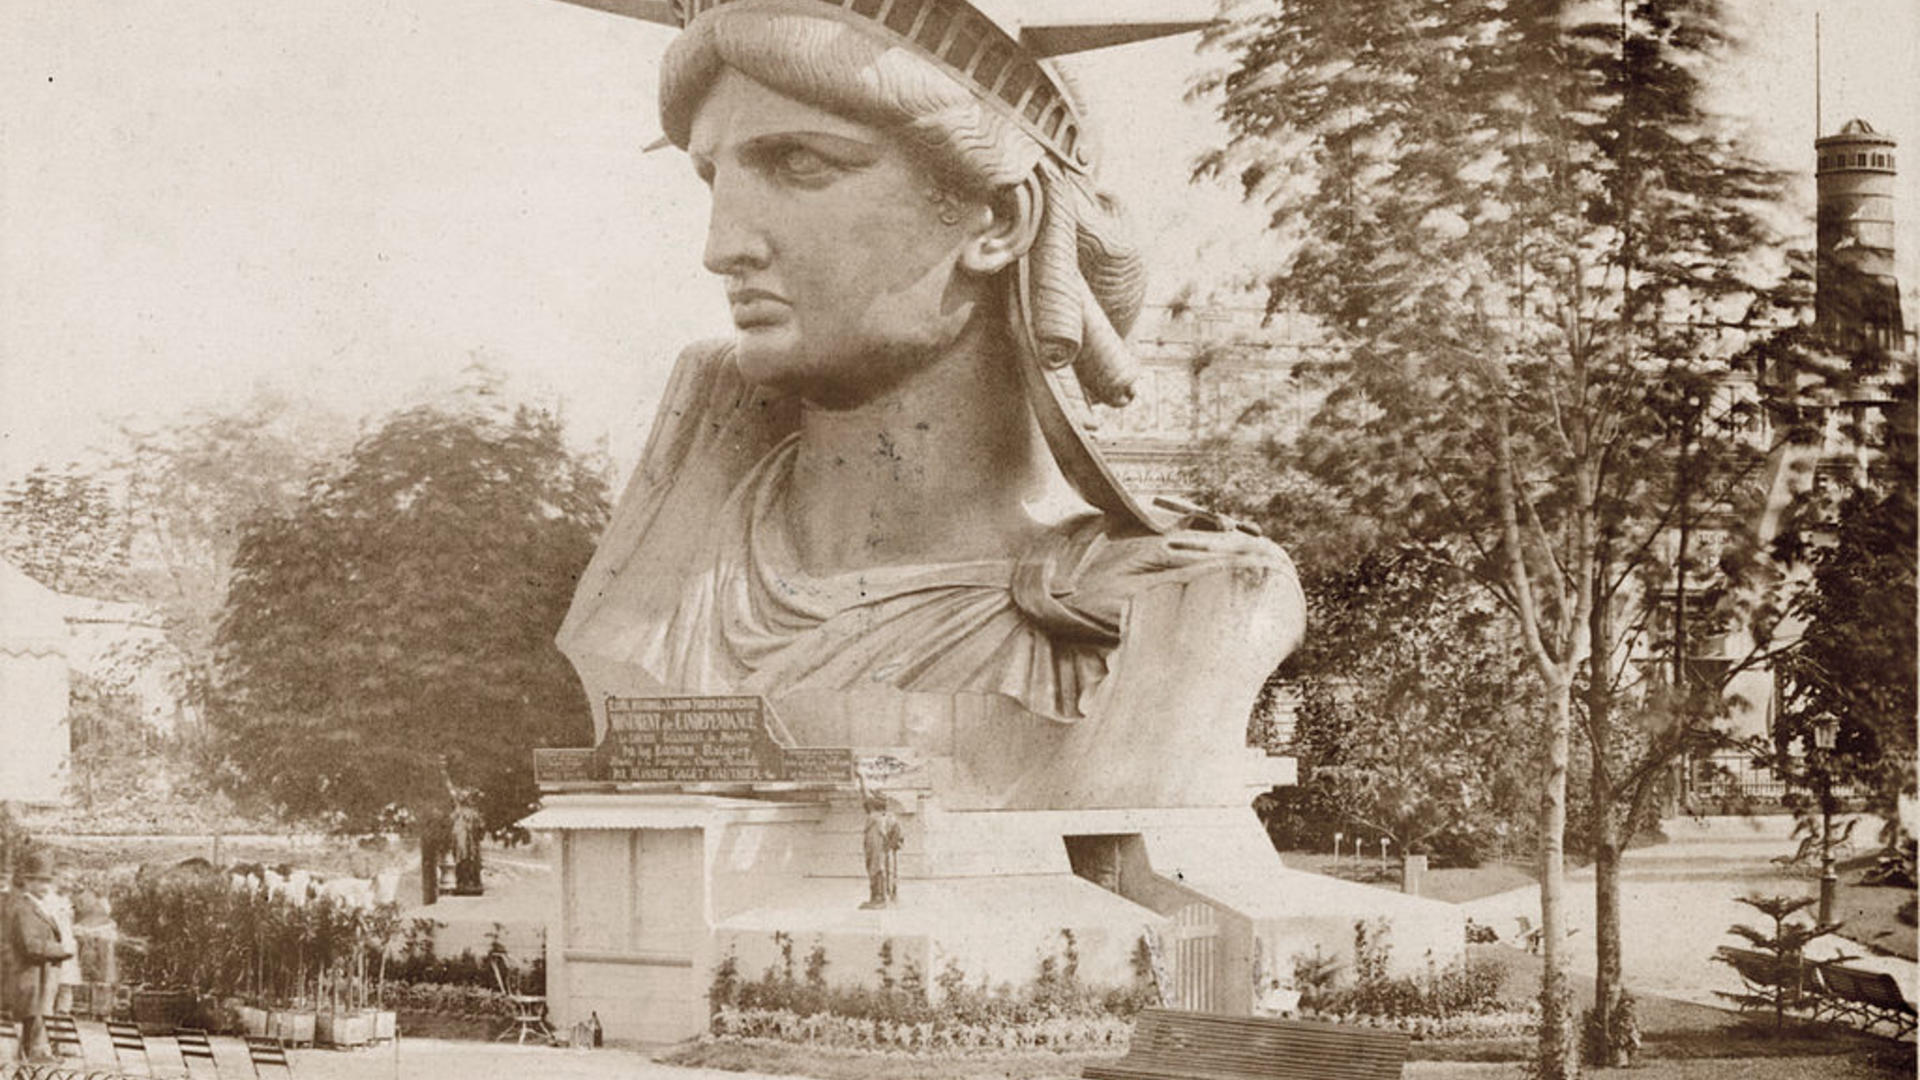 Head of the Statue of Liberty